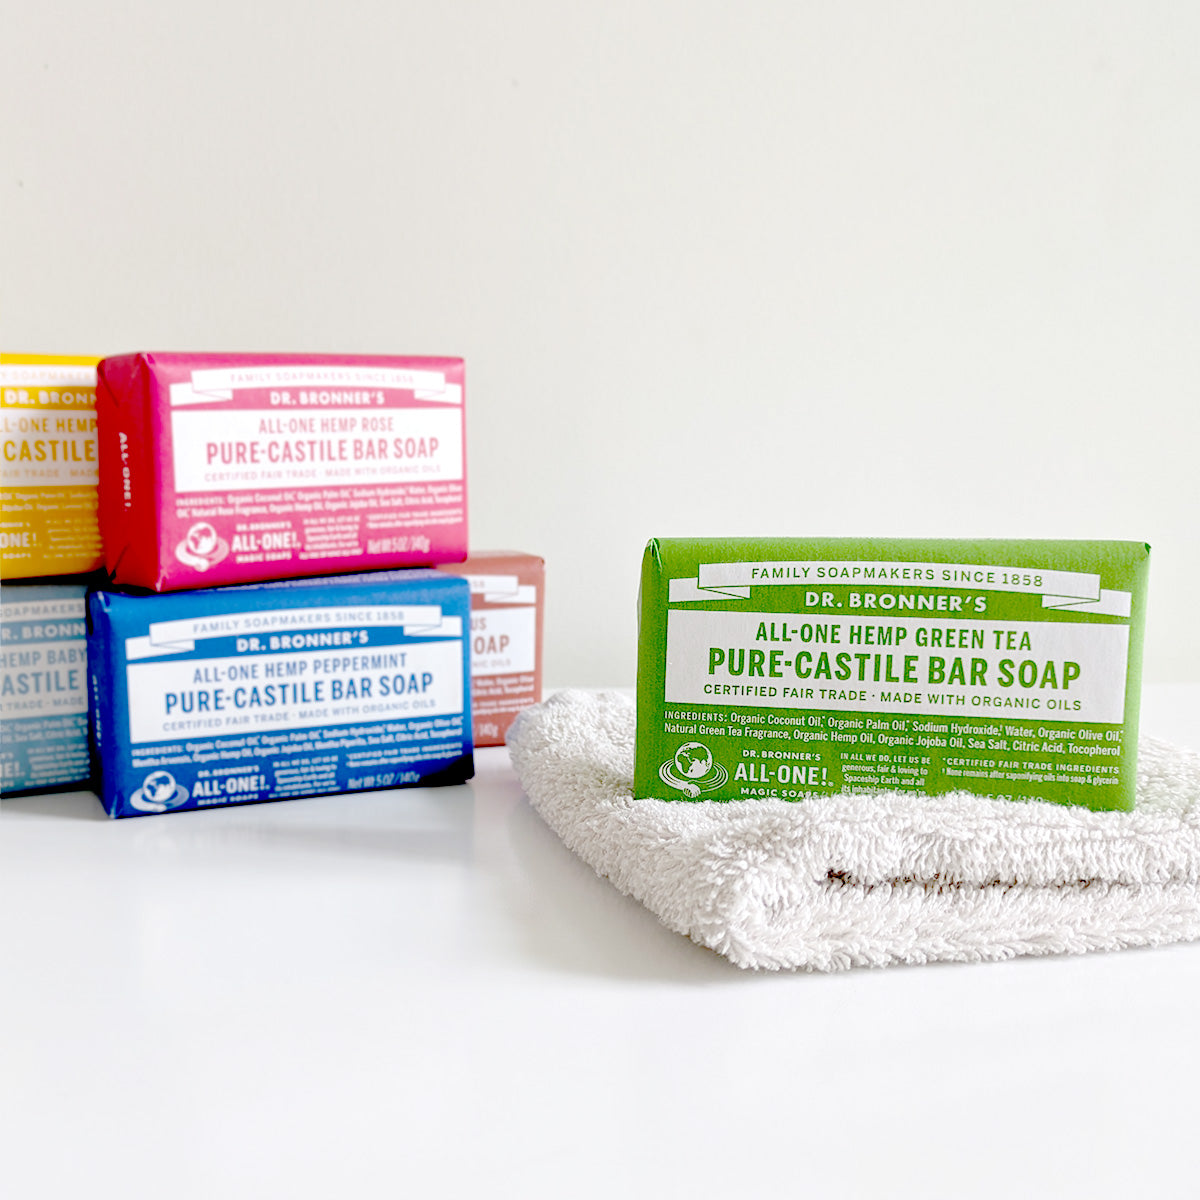 Pure-Castile Bar Soap made with Organic Peppermint Oil